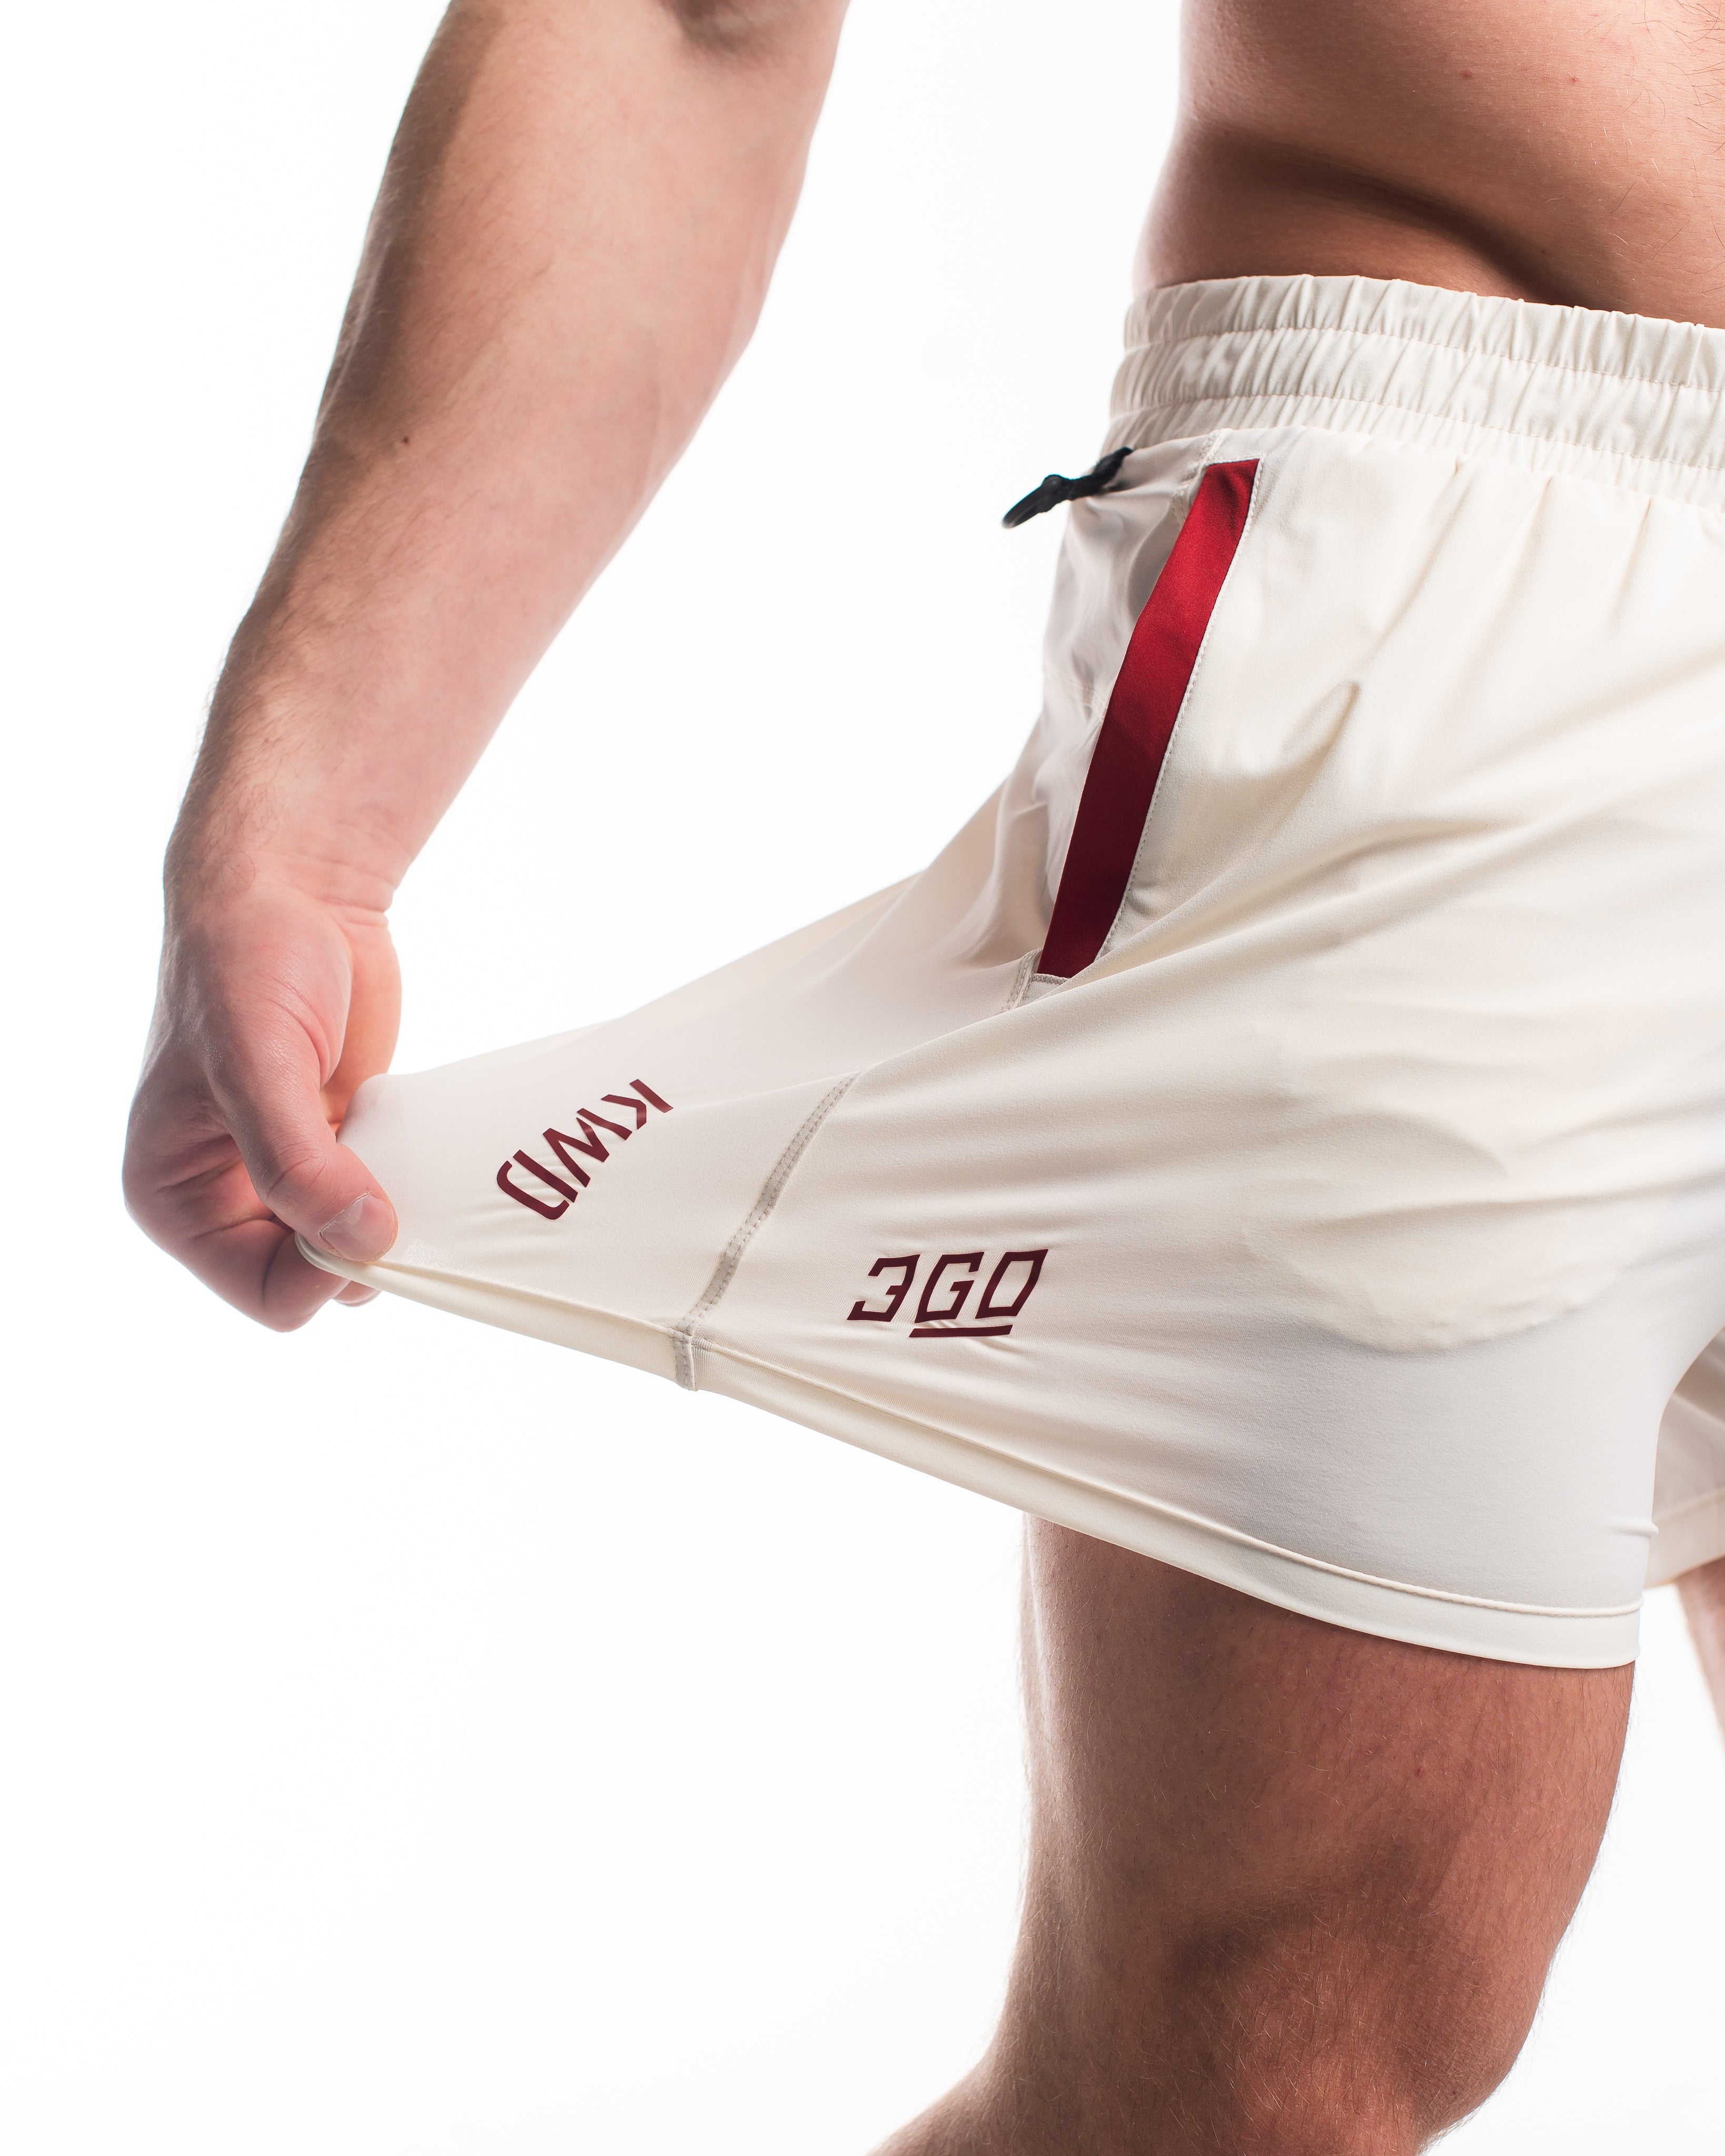 360GO was created to provide the flexibility for all movements in your training while offering comfort. These shorts offer 360 degrees of stretch in all angles and allow you to remain comfortable without limiting any movement in both training and life environments. Designed with a wide drawstring to easily adjust your waist without slipping. Purchase 360GO KWD Squat Shorts from A7 UK. Genouill�res powerlifting shipping to France, Spain, Ireland, Germany, Italy, Sweden and EU.